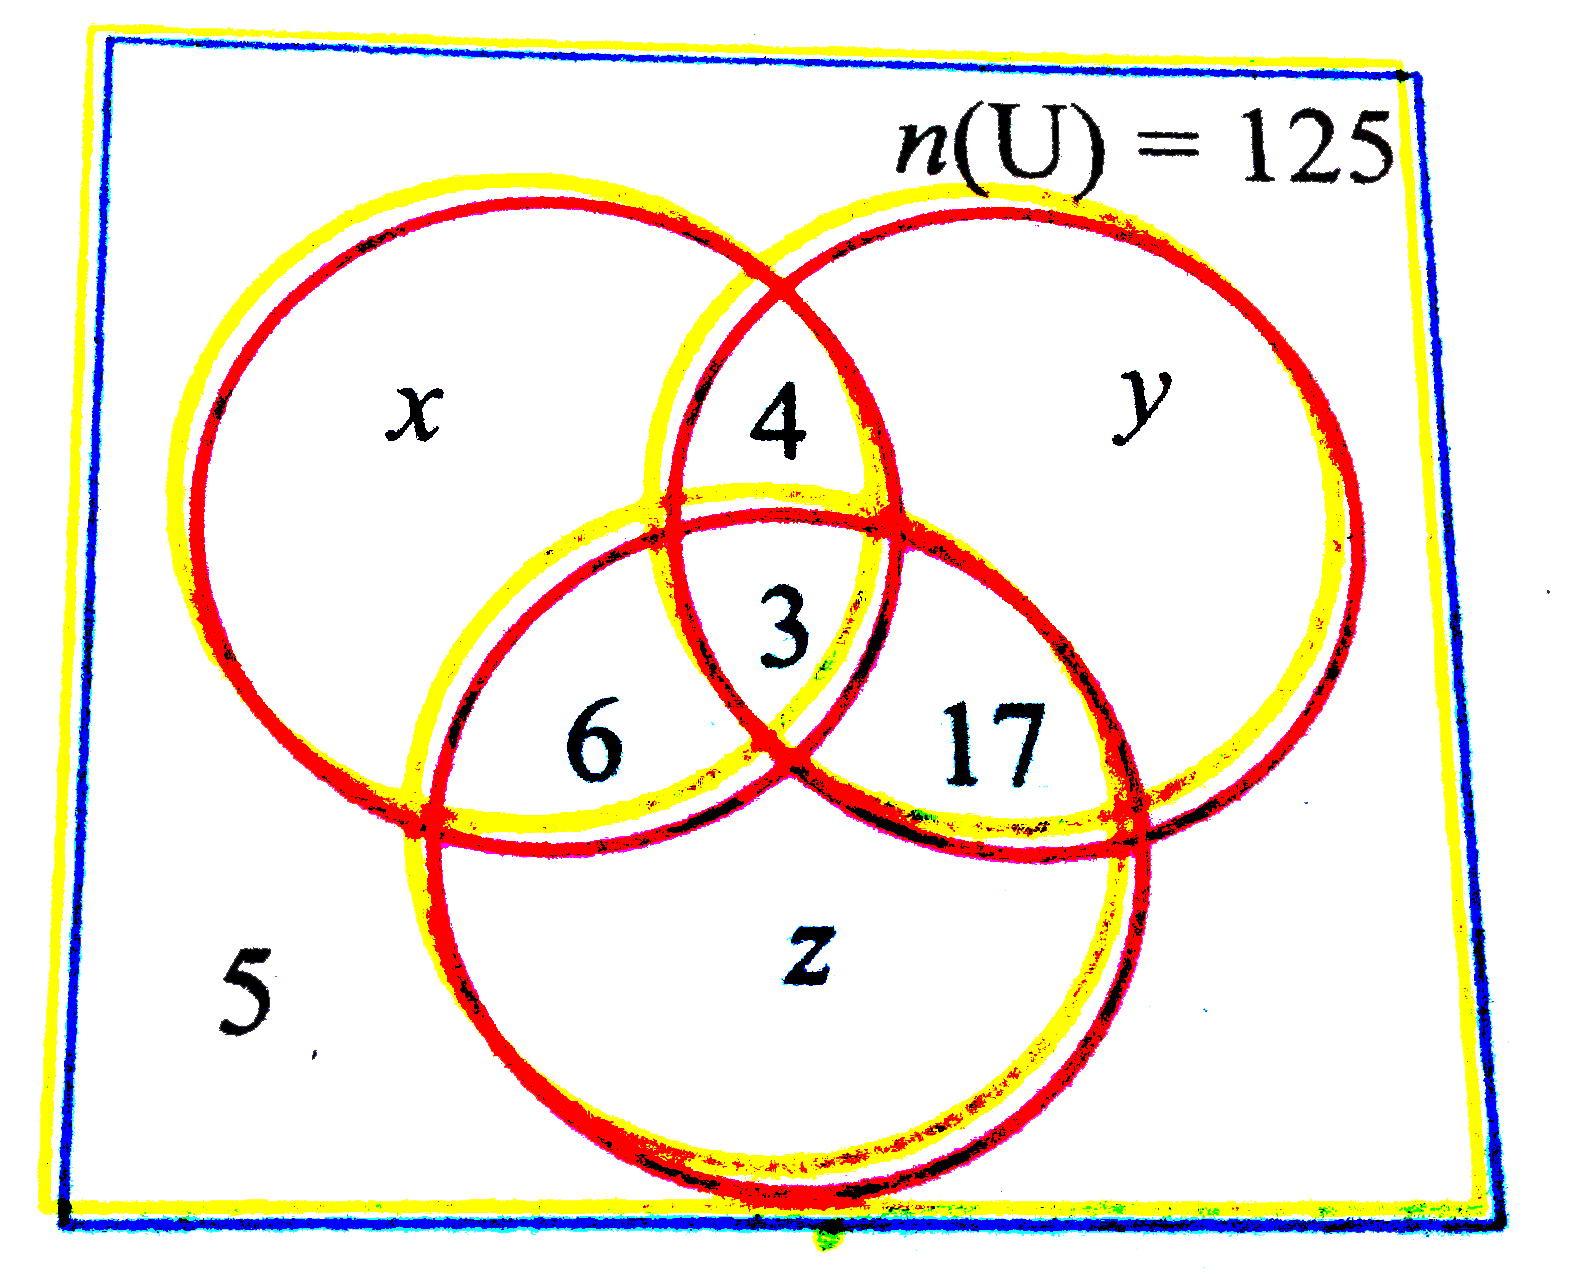 In the adjacent diagram, if n(U) = 125, y is two times of x and z is 10 more than x, then find the value of x, y and z.